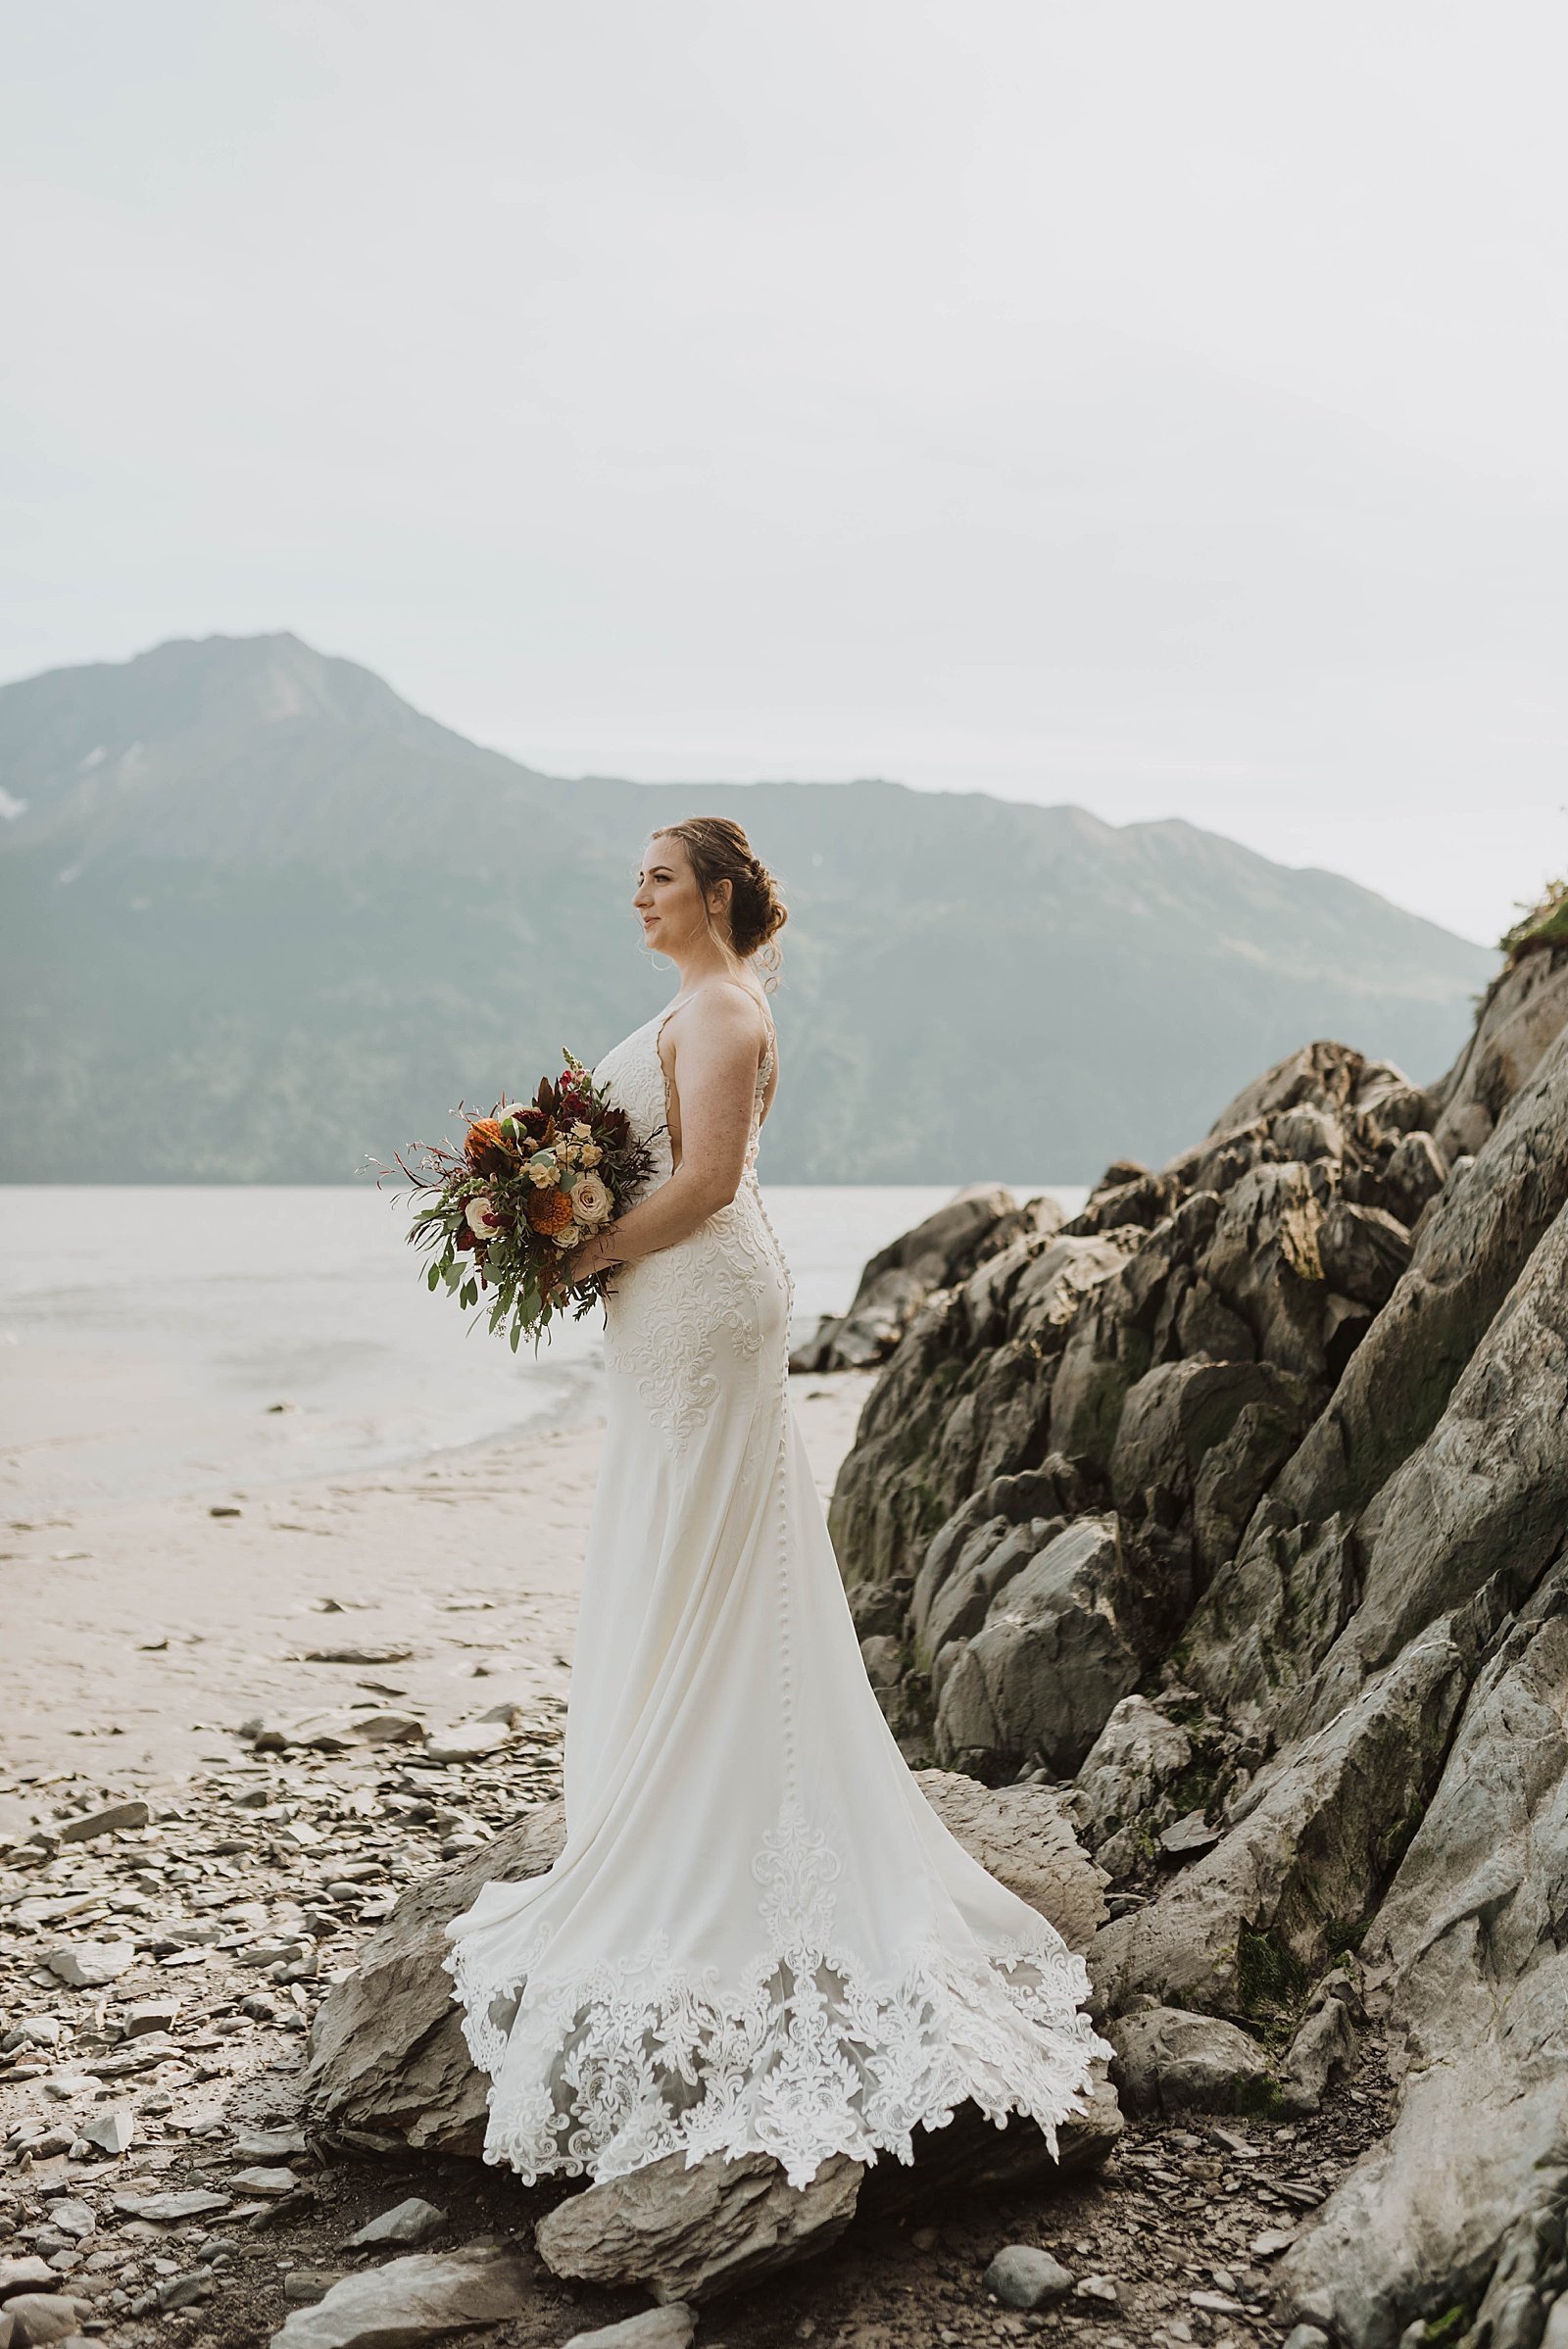  Alaska bride standing on a rock in front of the water with mountains in the background 